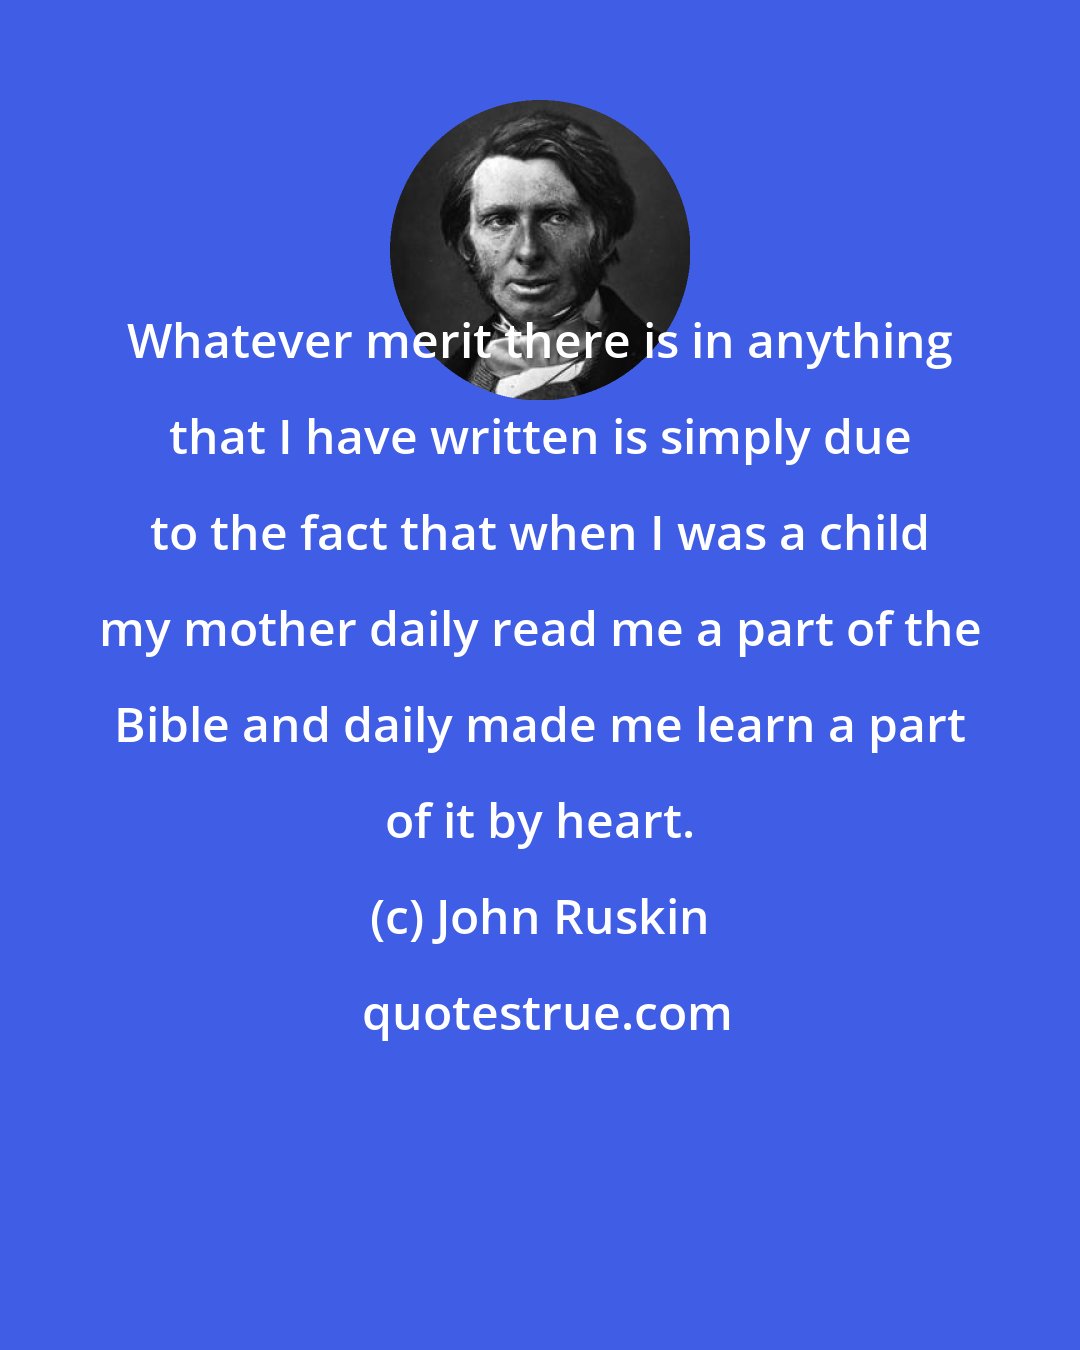 John Ruskin: Whatever merit there is in anything that I have written is simply due to the fact that when I was a child my mother daily read me a part of the Bible and daily made me learn a part of it by heart.